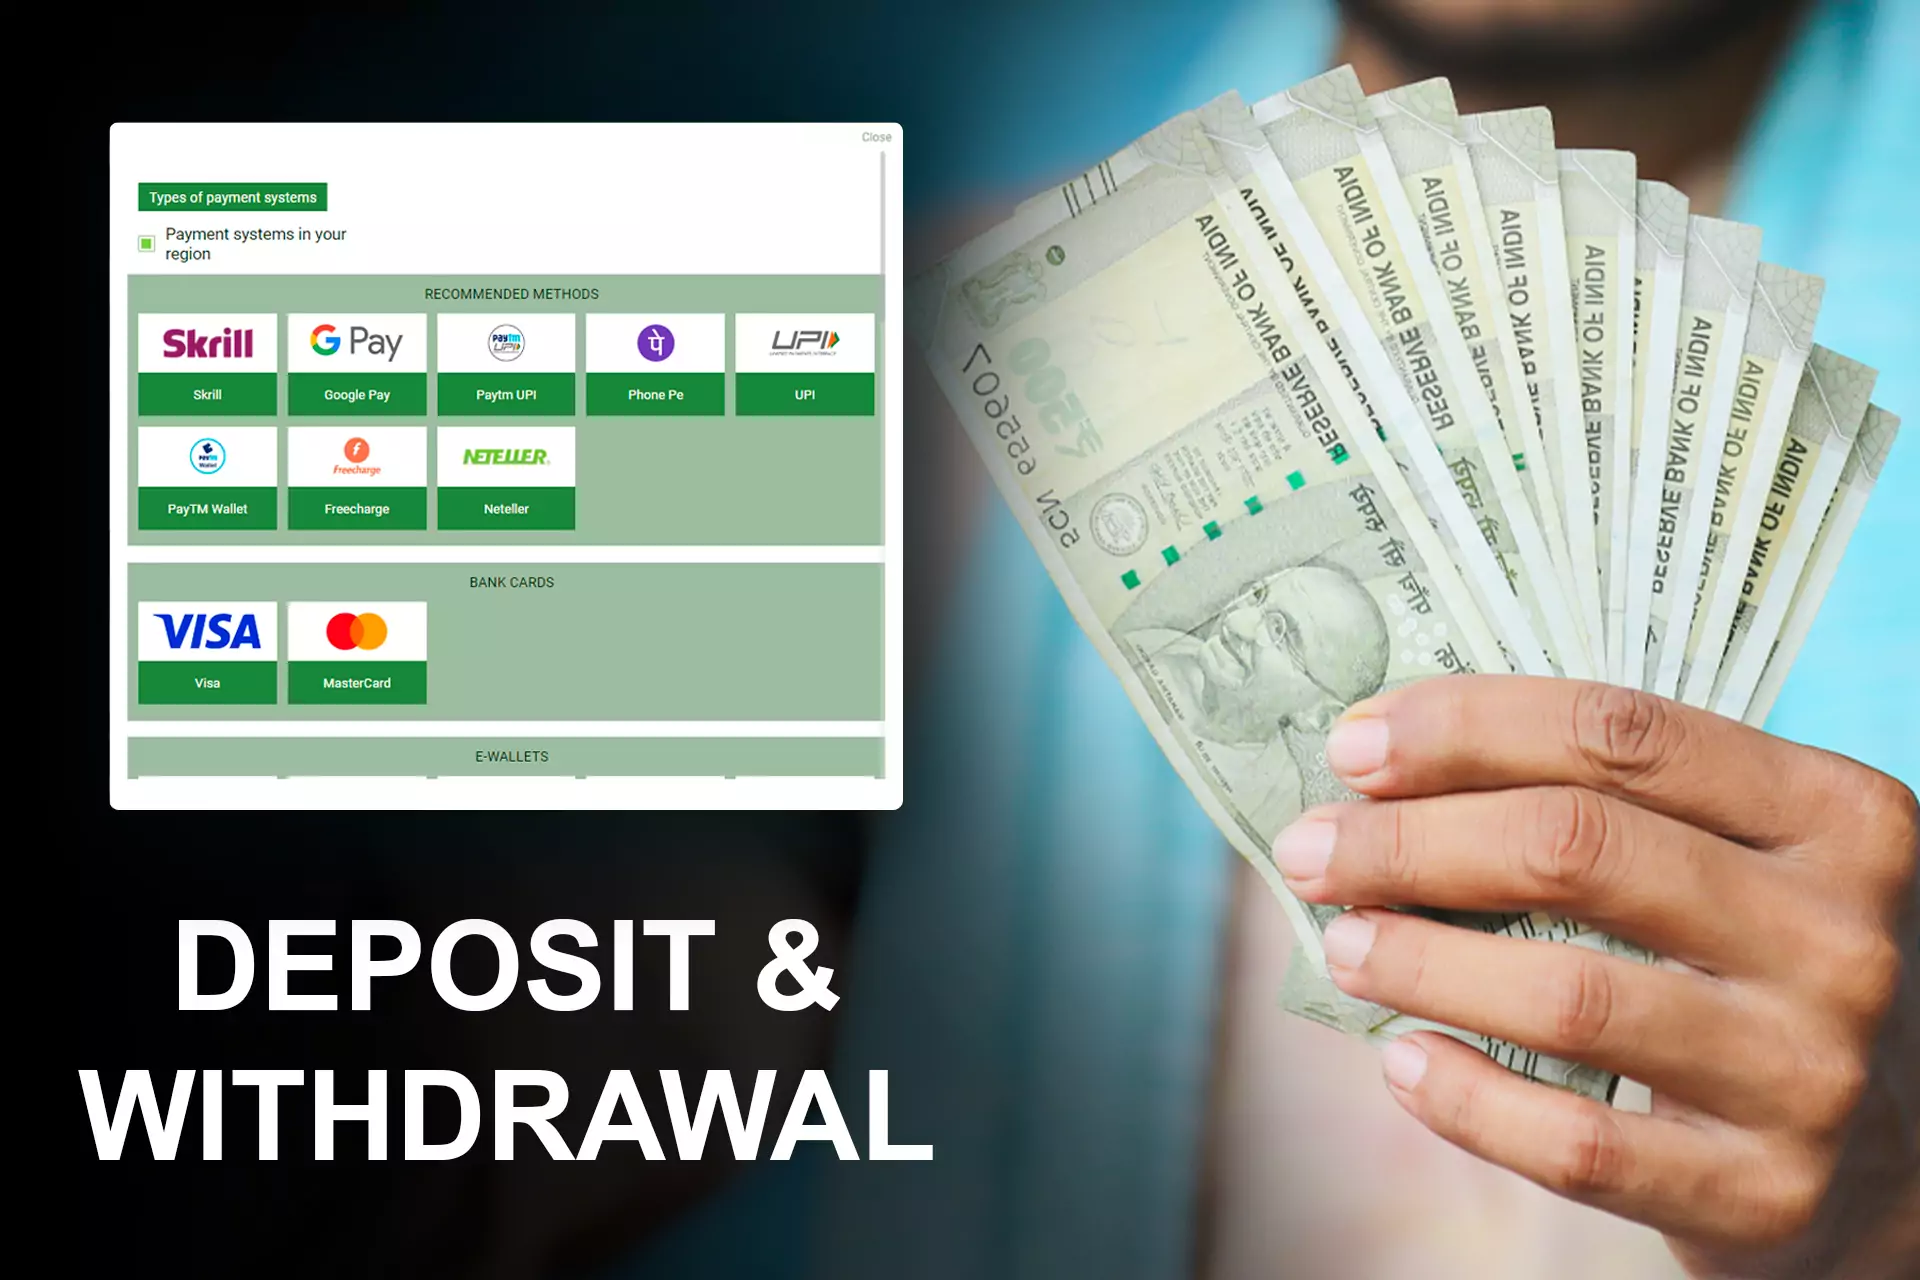 At Linebet you can use any usual Indian payment system to make deposits and withdraw winnings.